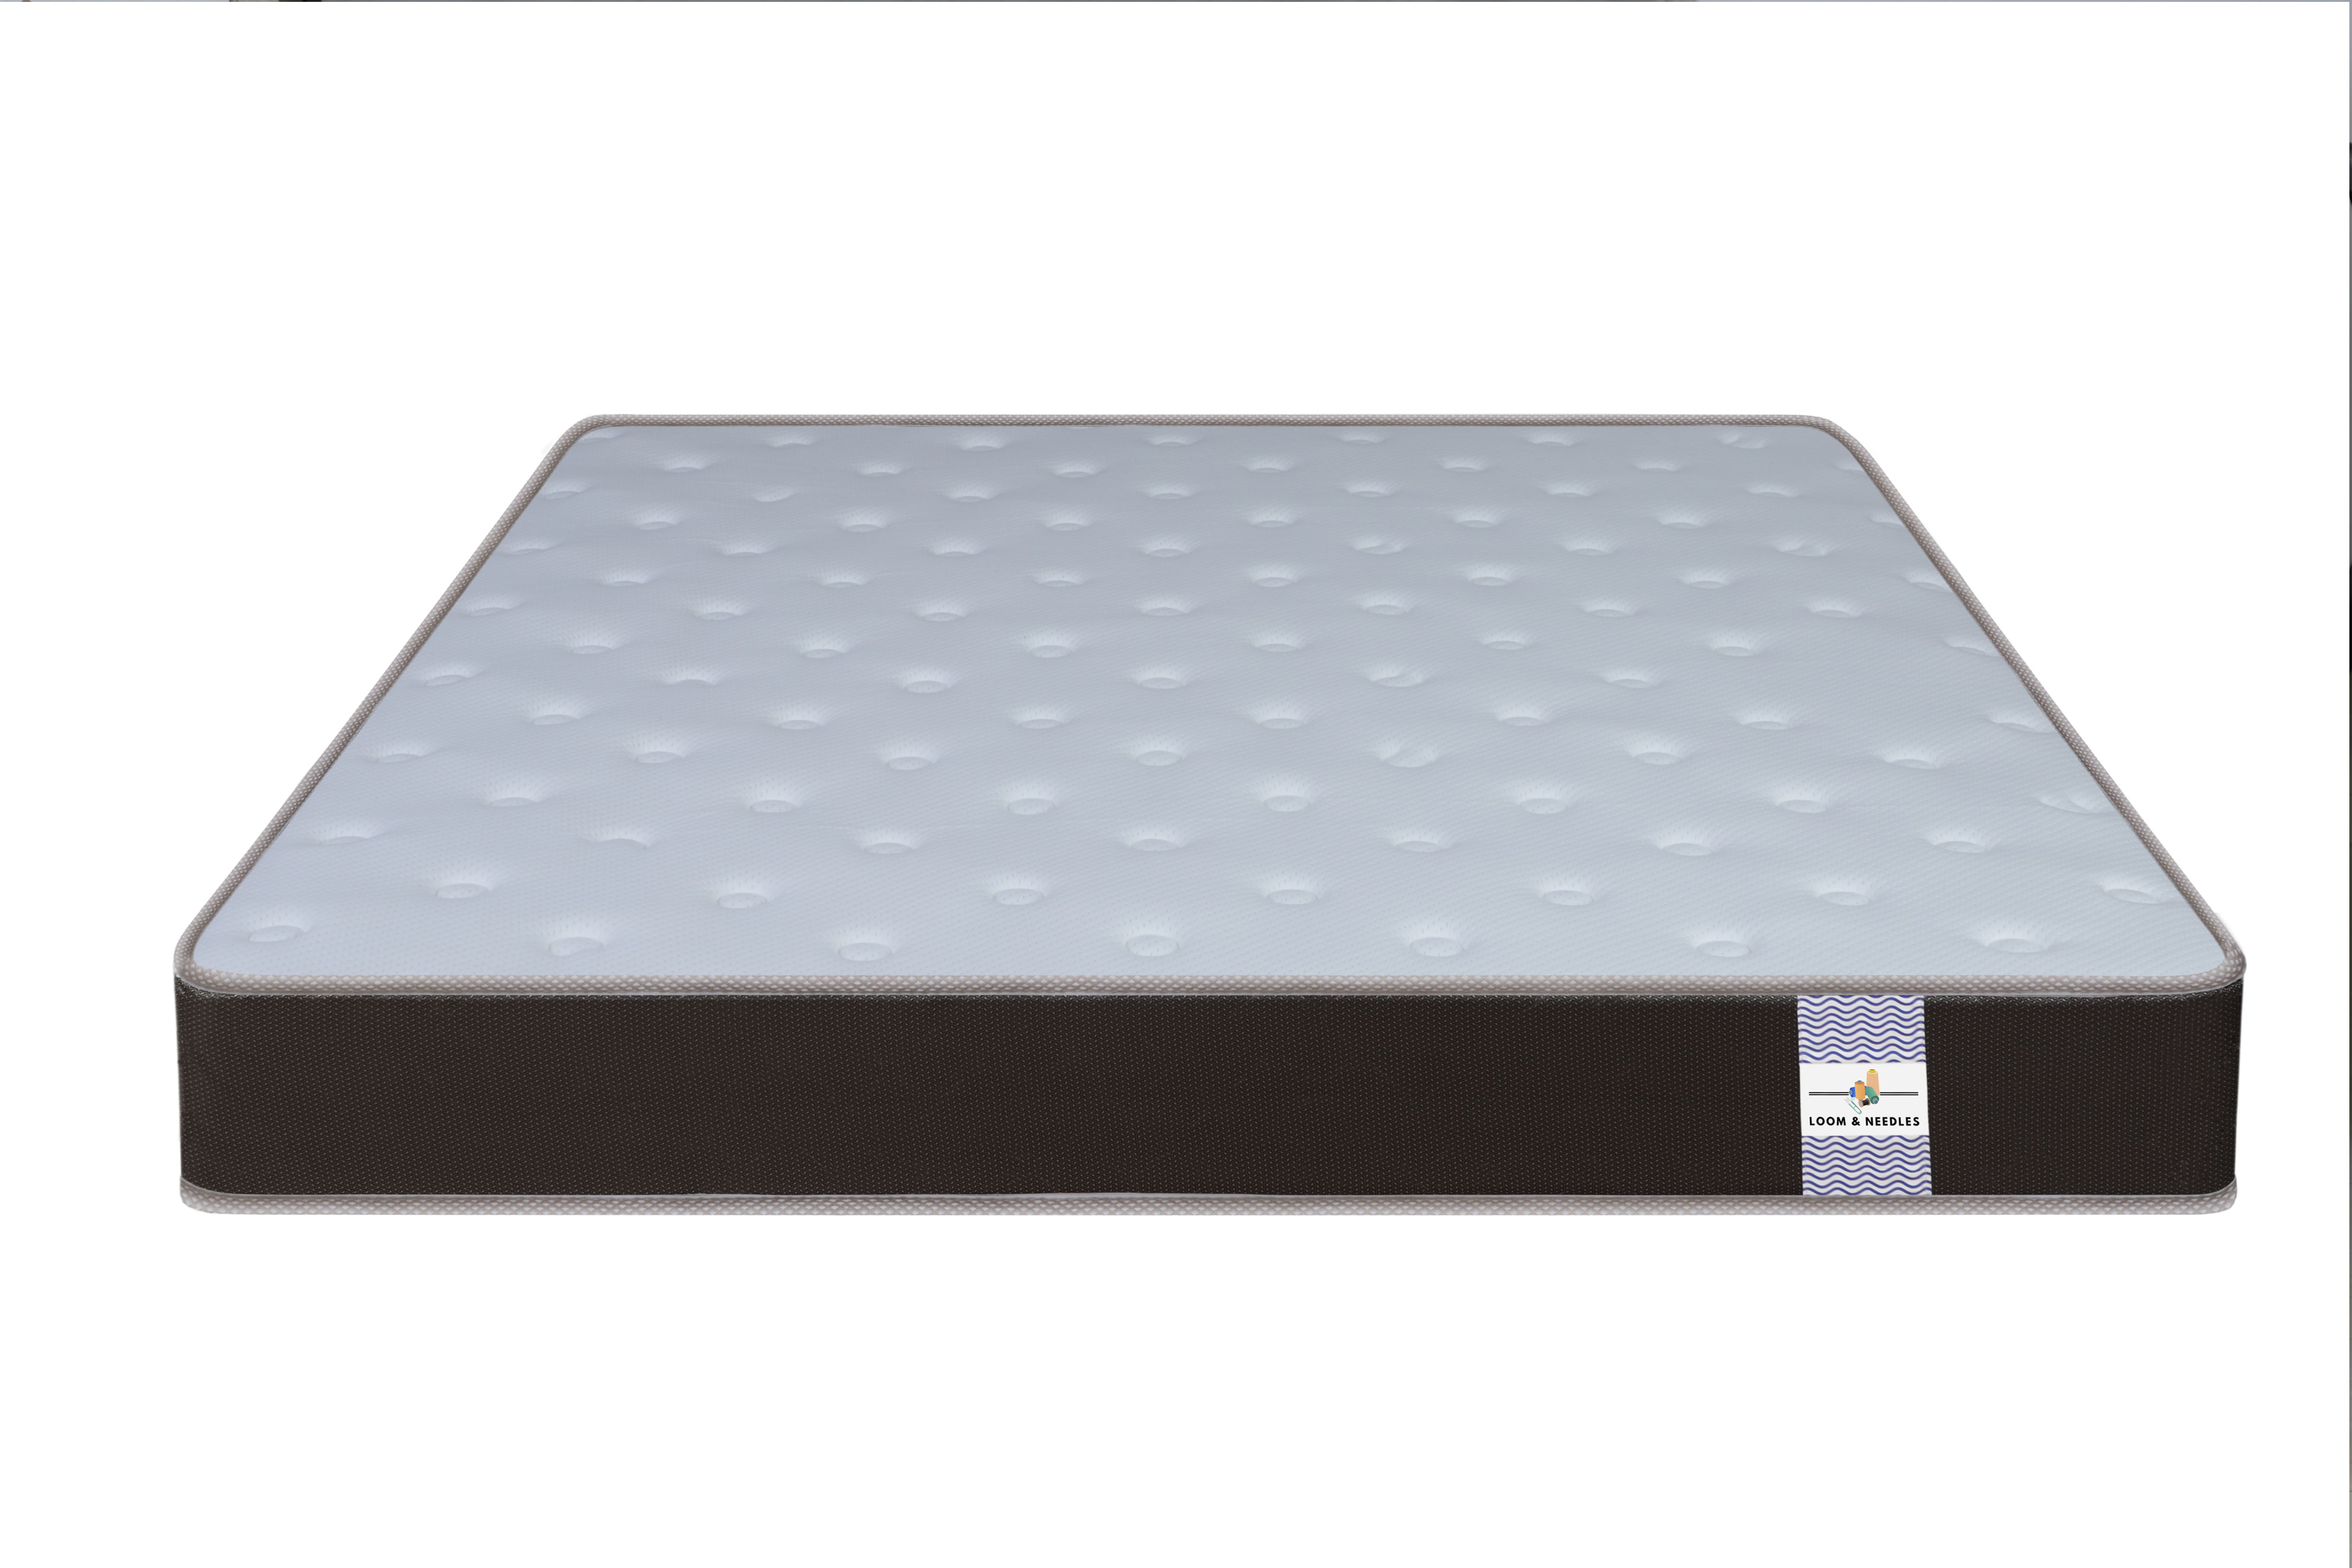 bonded foam mattress pros and cons